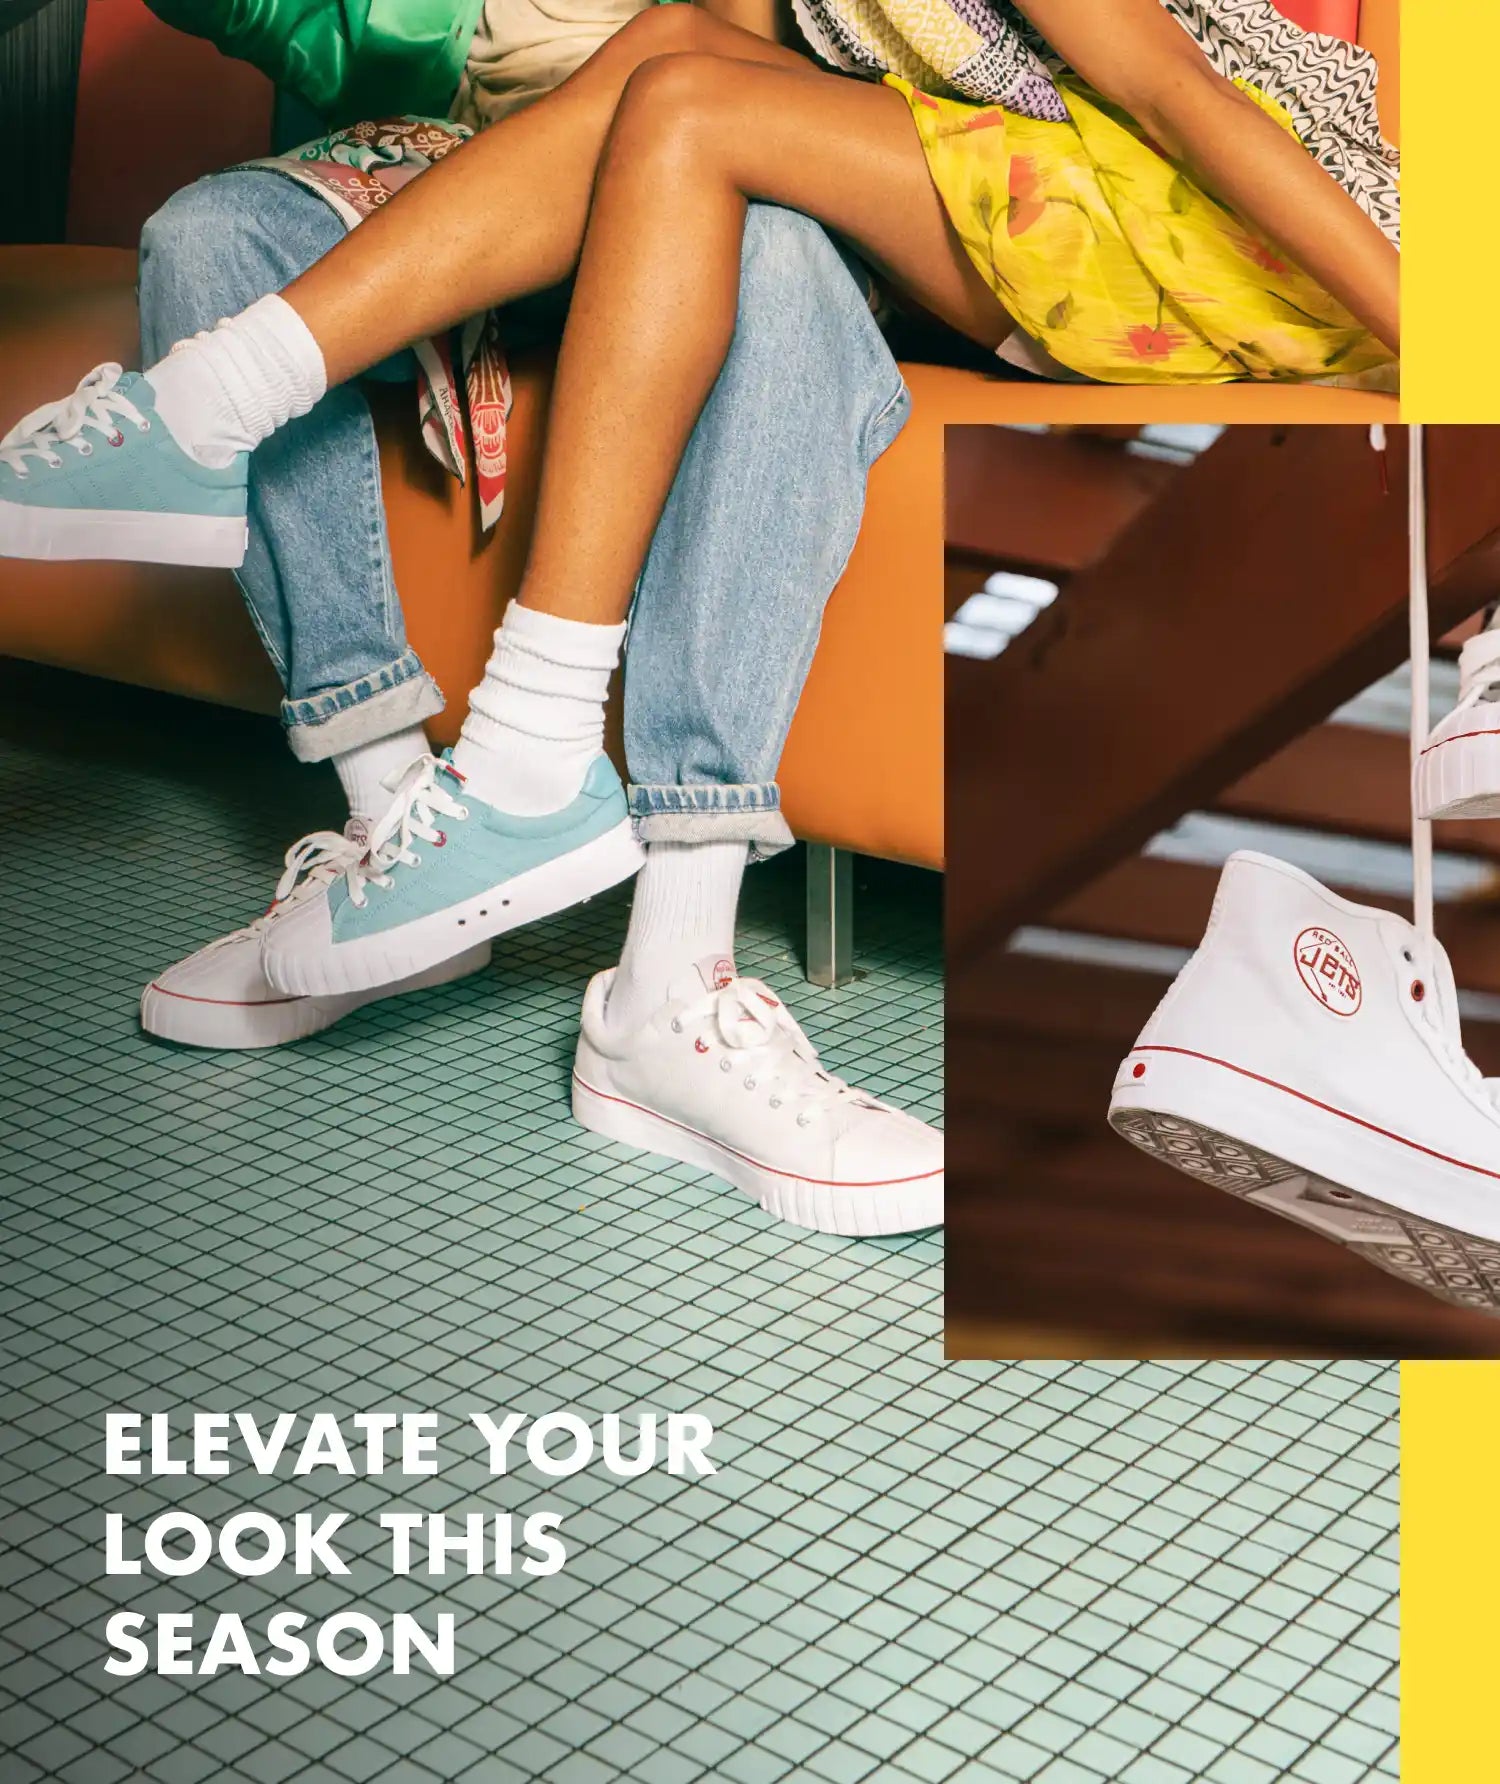 Elevate Your Look This Season Red Ball Jet hi tops and lo top shoes